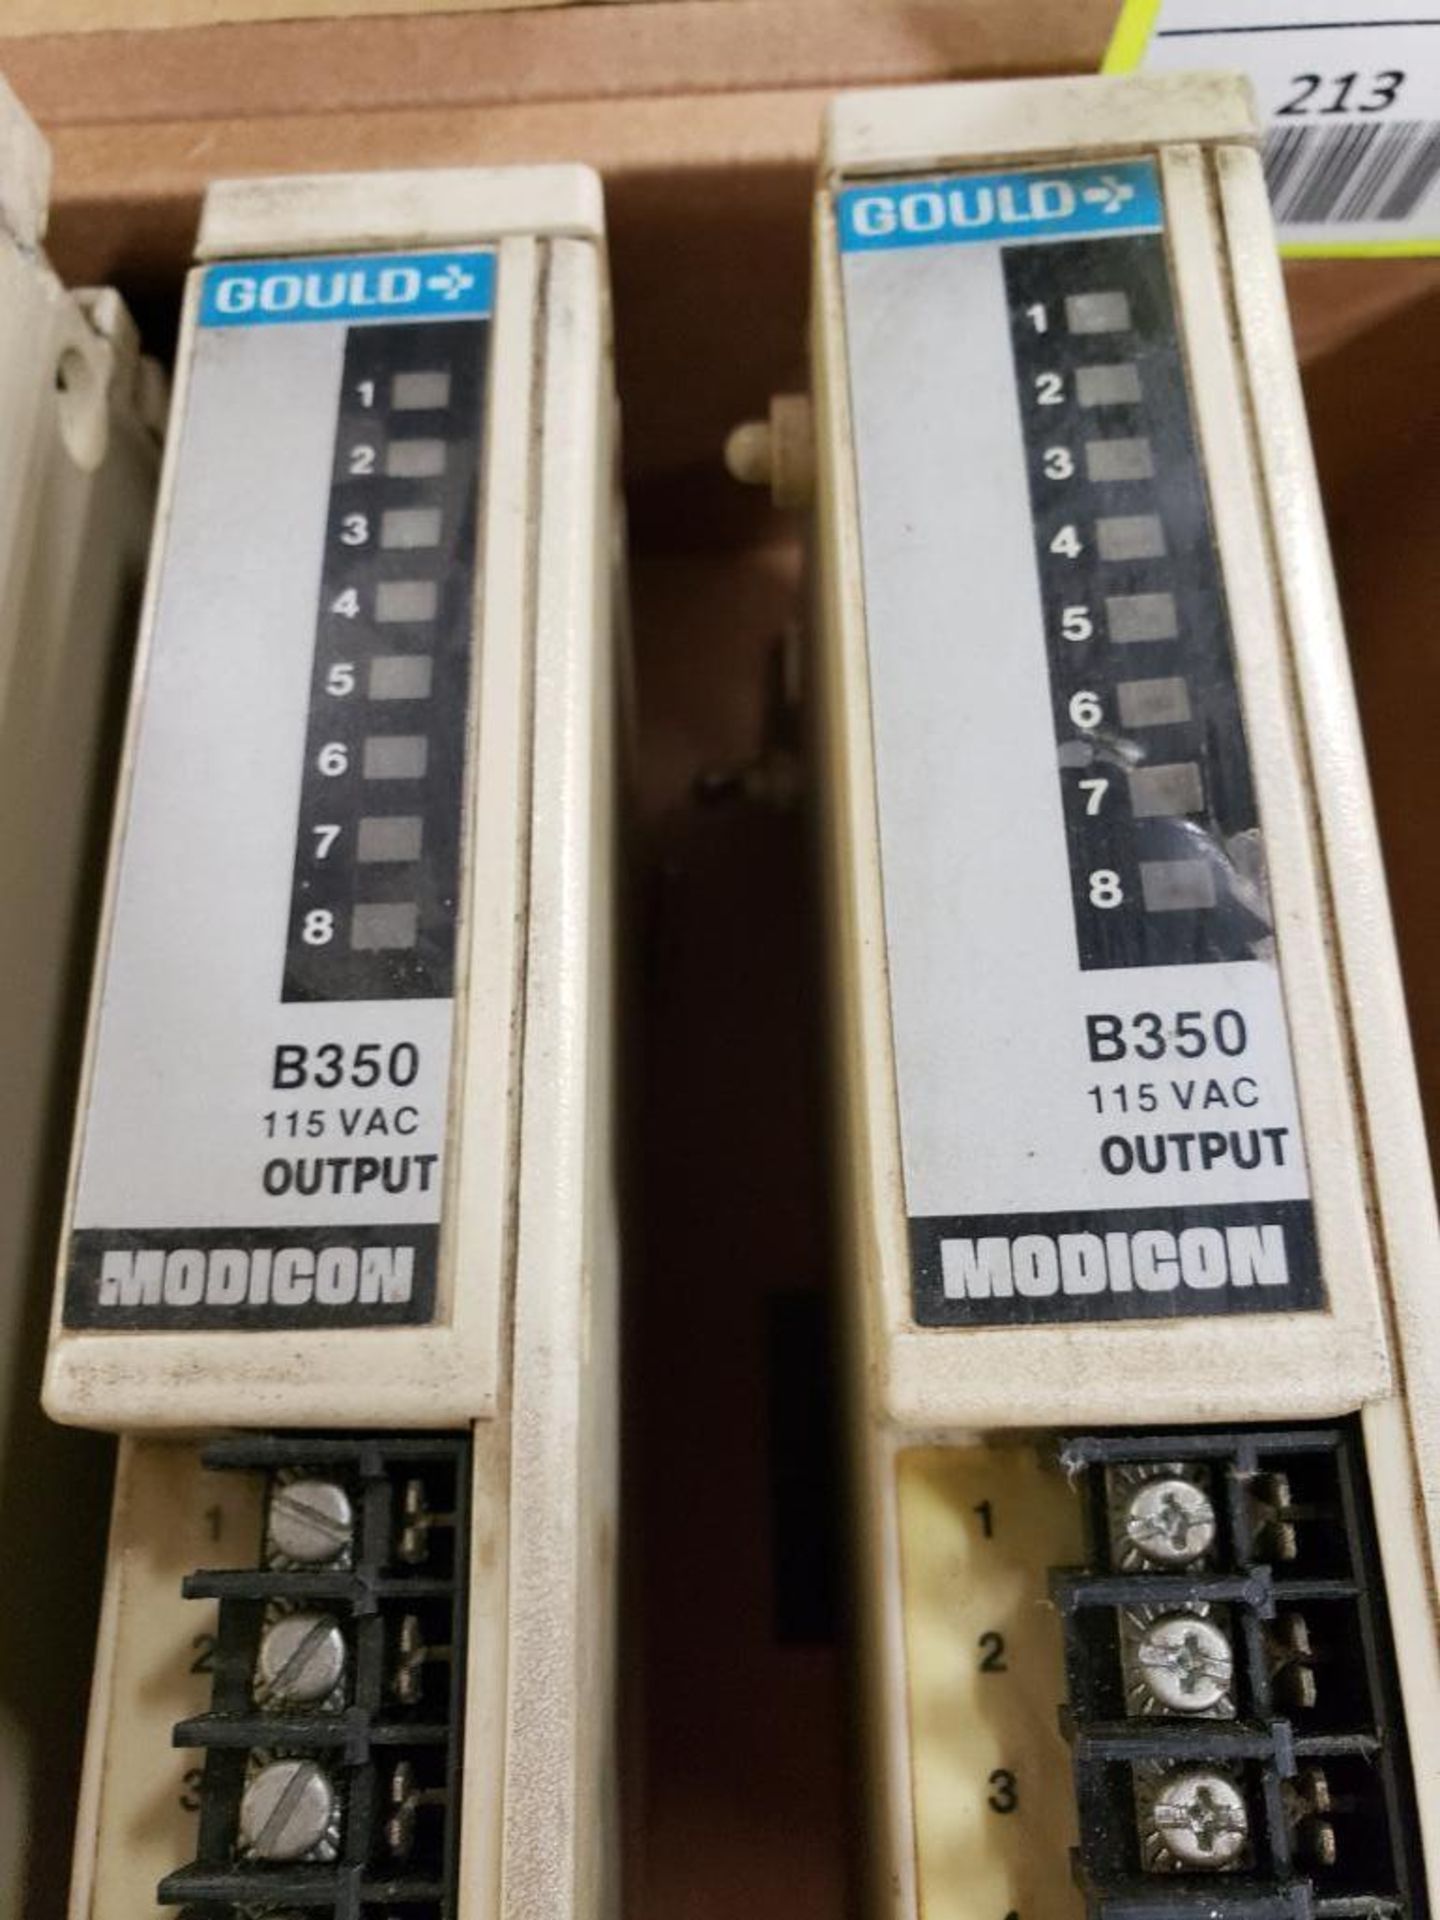 Qty 4 - Gould Modicon model B350 input. - Image 2 of 2